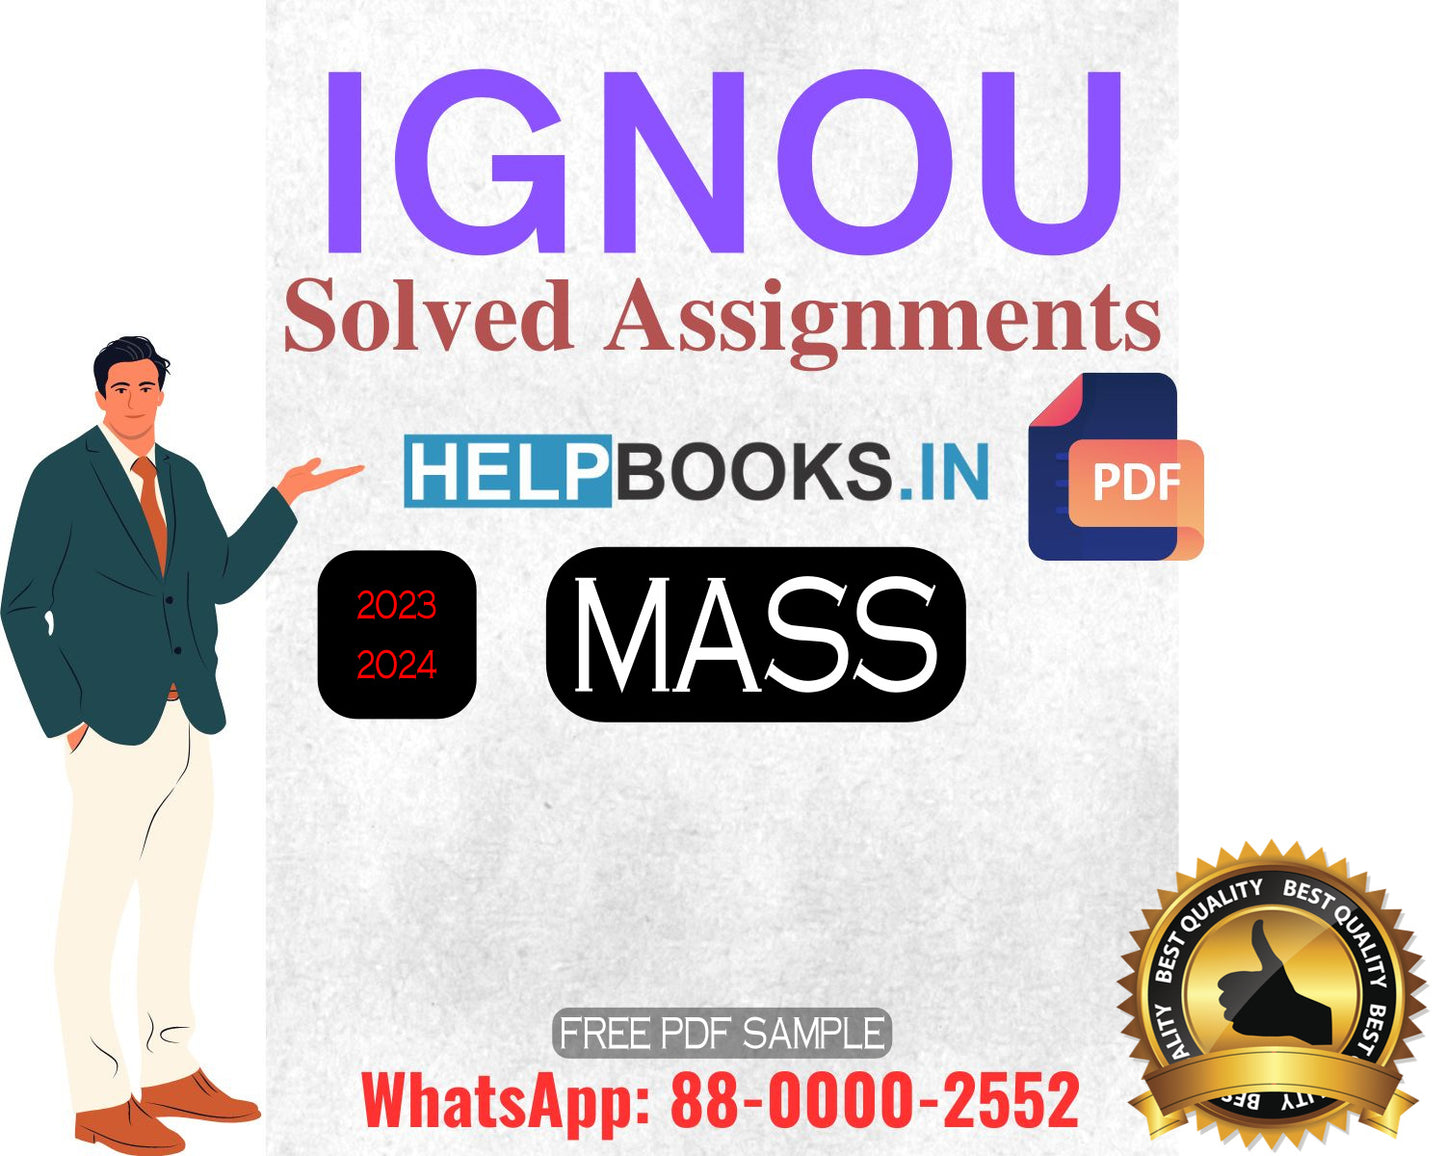 IGNOU Master's Degree Programme Latest IGNOU Solved Assignment 2023-24 : MASS Master of Arts Sustainability Science Solved Assignments